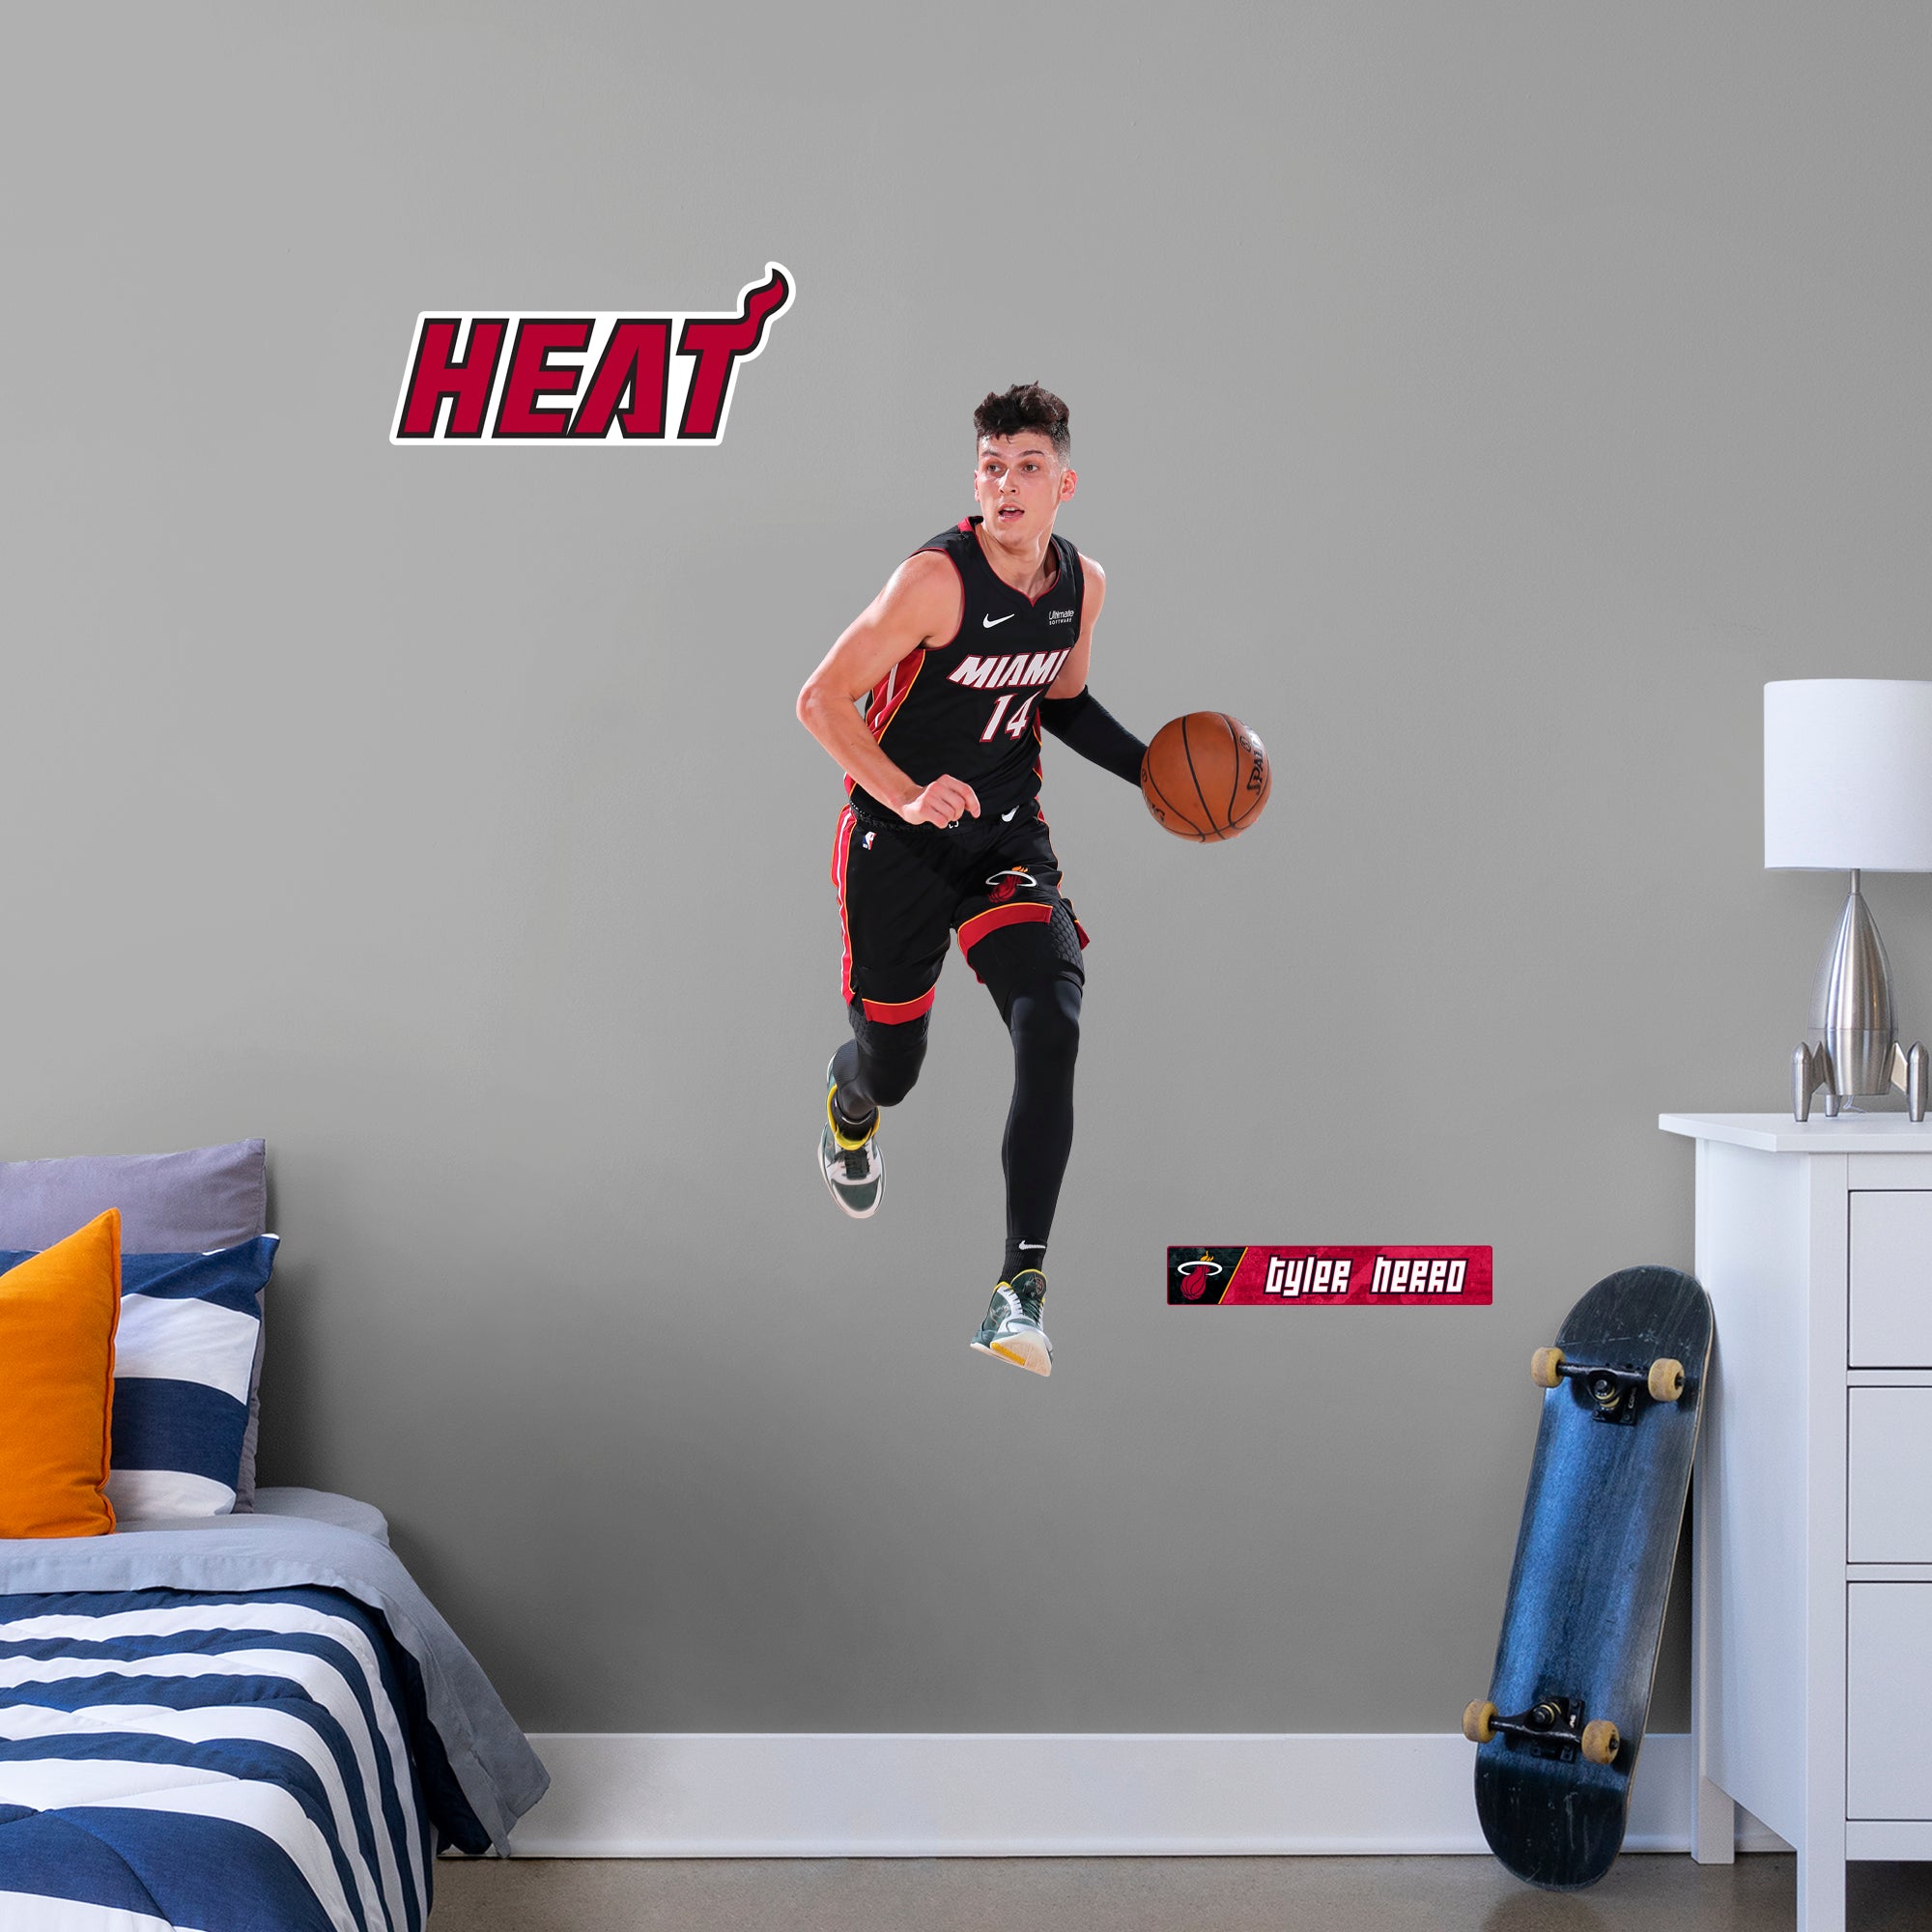 Tyler Herro for Miami Heat: RealBig Officially Licensed NBA Removable Wall Decal Giant Athlete + 2 Decals by Fathead | Vinyl